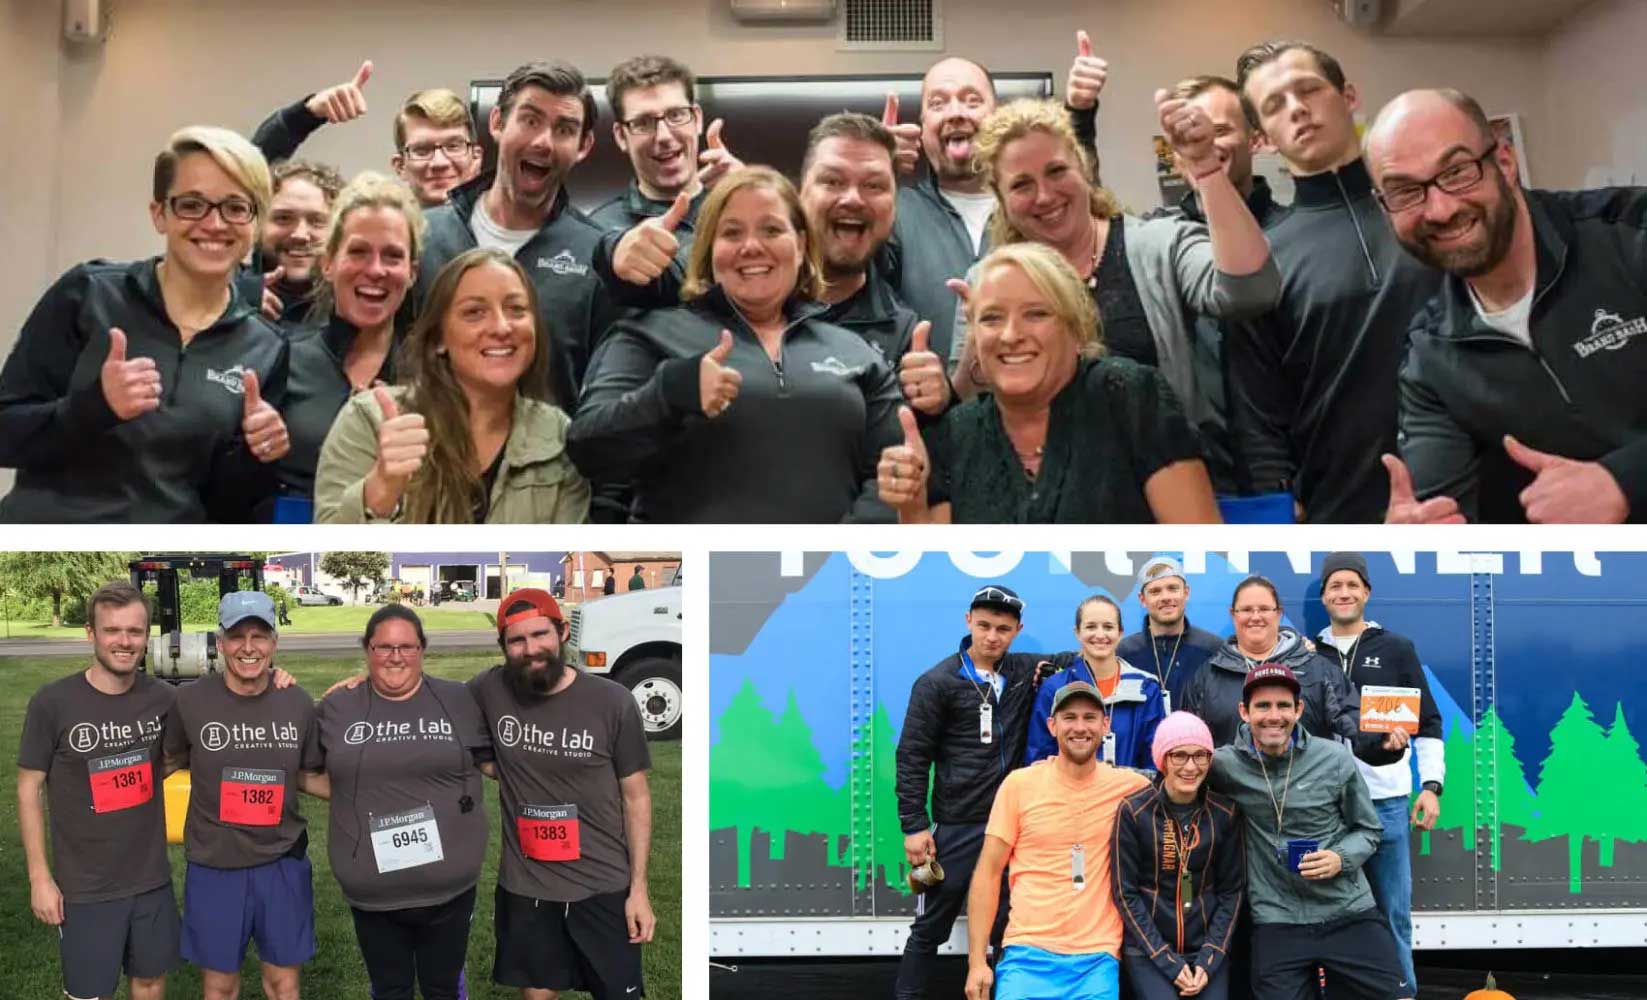 24 Hour Brand Bash, The Corporate Challenge, and Ragnar